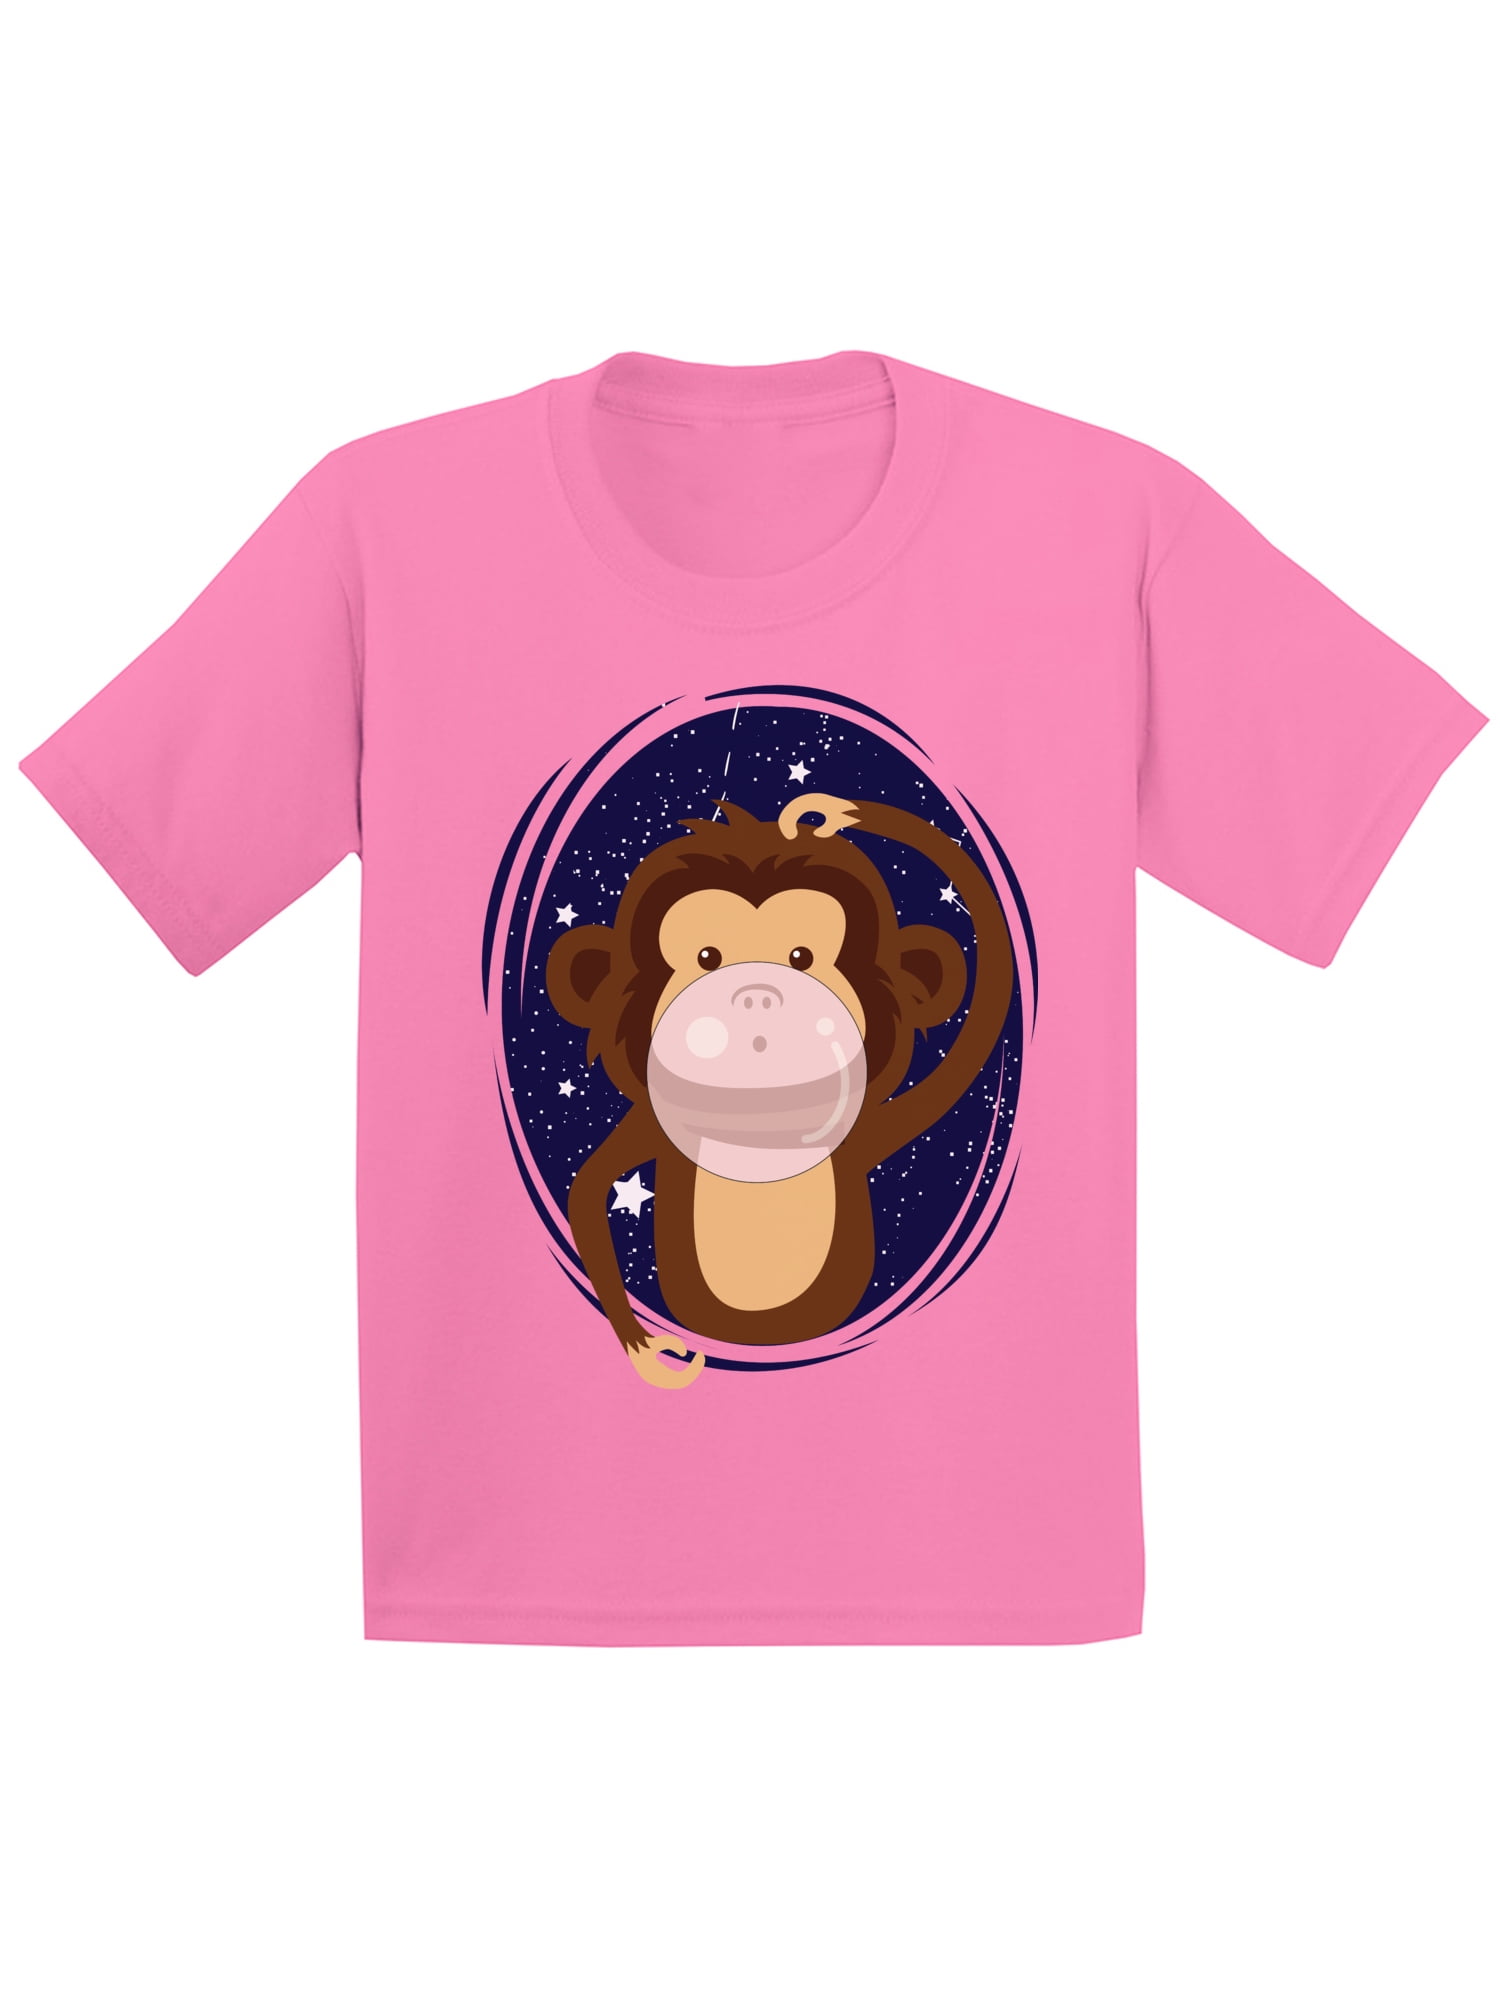 Youth Kids Childrens Monkey Chimp Singer Band Funny T-shirt NEW Age 5-13 